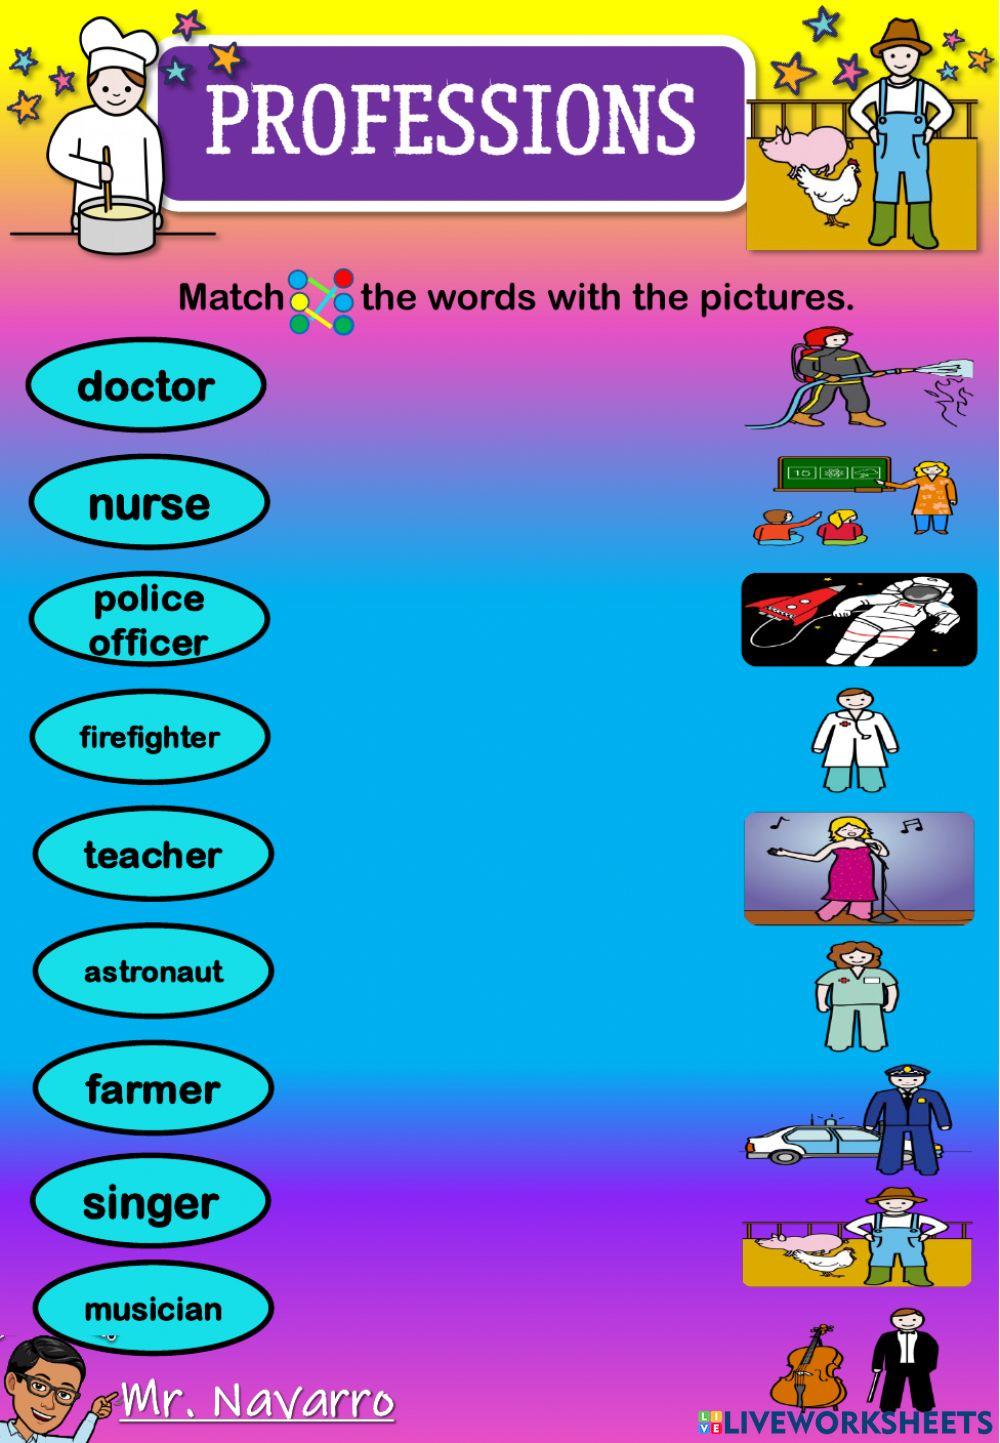 Professions (Match the words with the pictures)